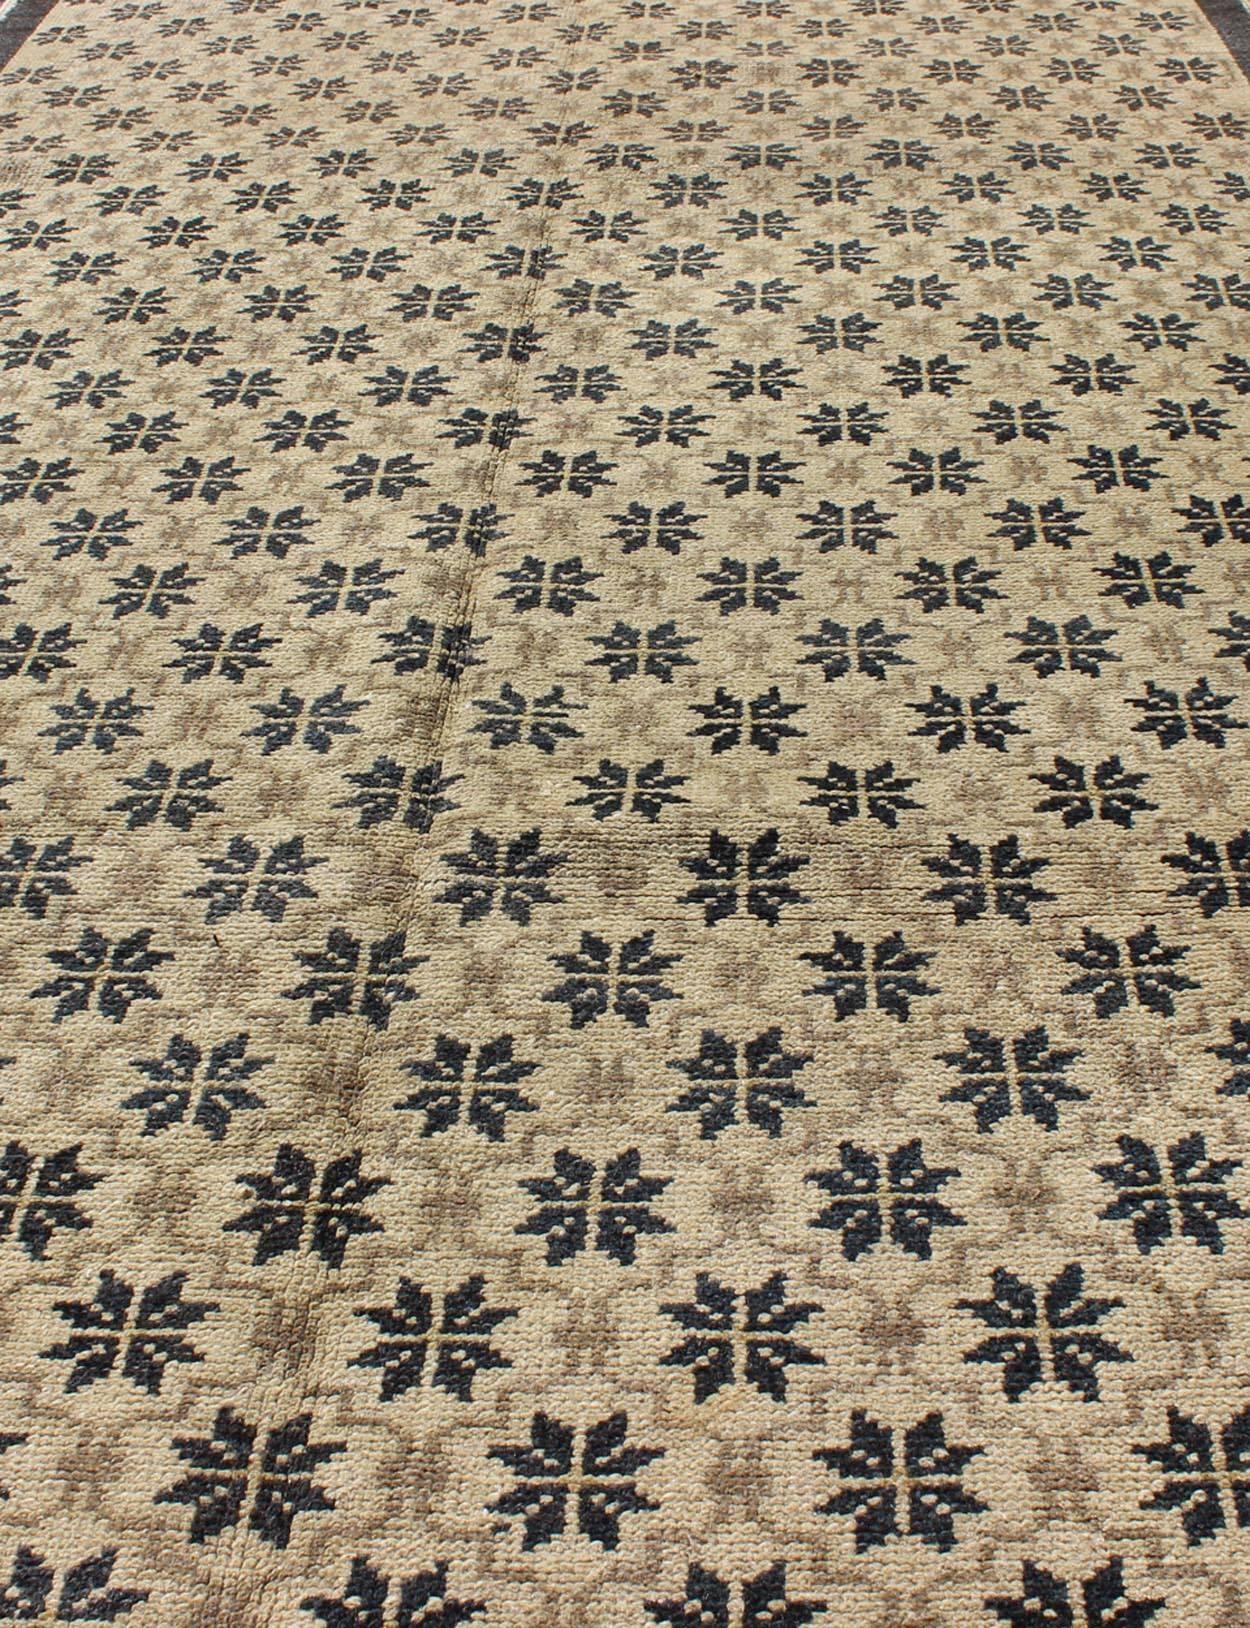 Mid-20th Century Onyx and Cream Vintage Turkish Oushak Rug with Latticework and Poinsettia Shapes For Sale